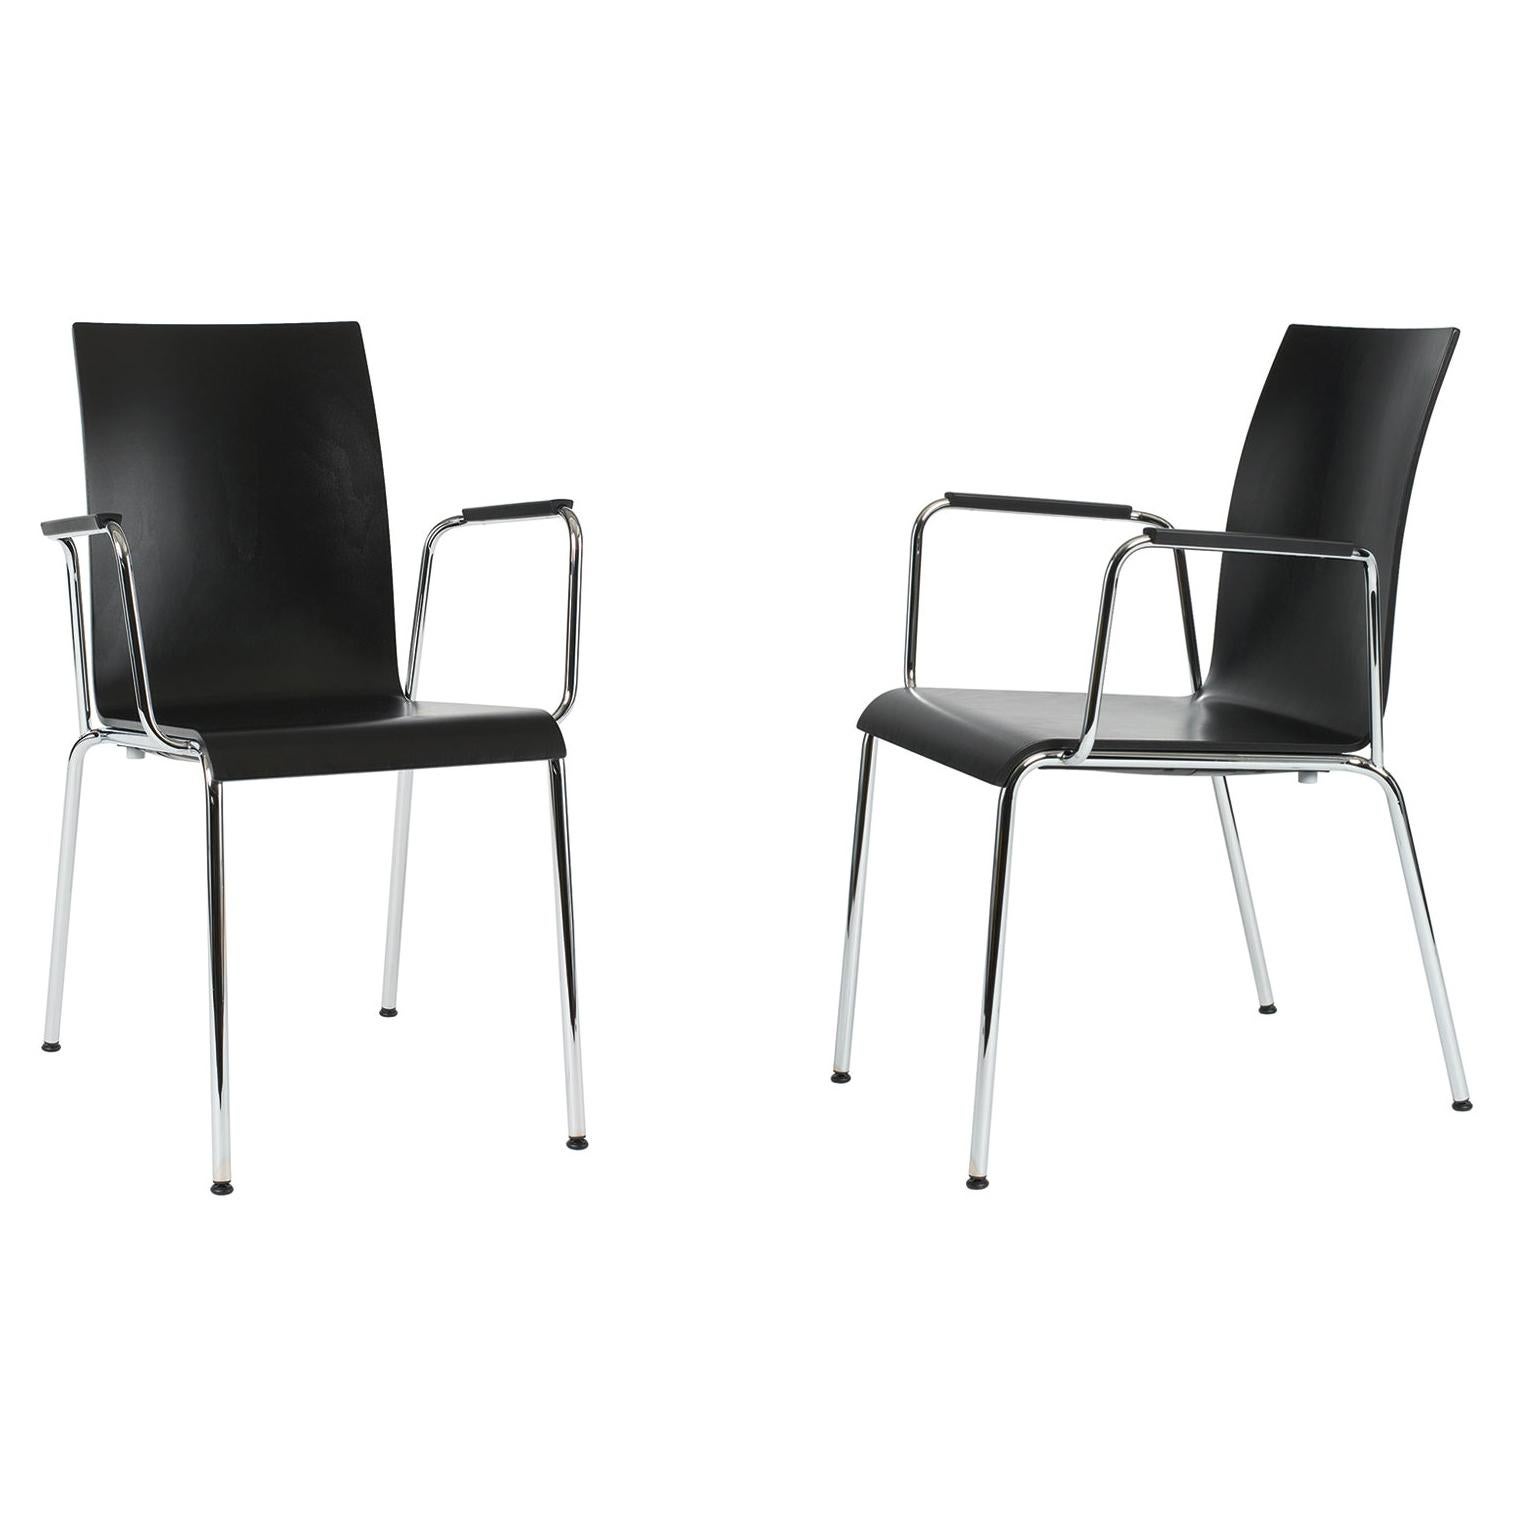 Set of 2 Dietiker Poro L Minimalist Dining Chairs with Arms, Made in Switzerland